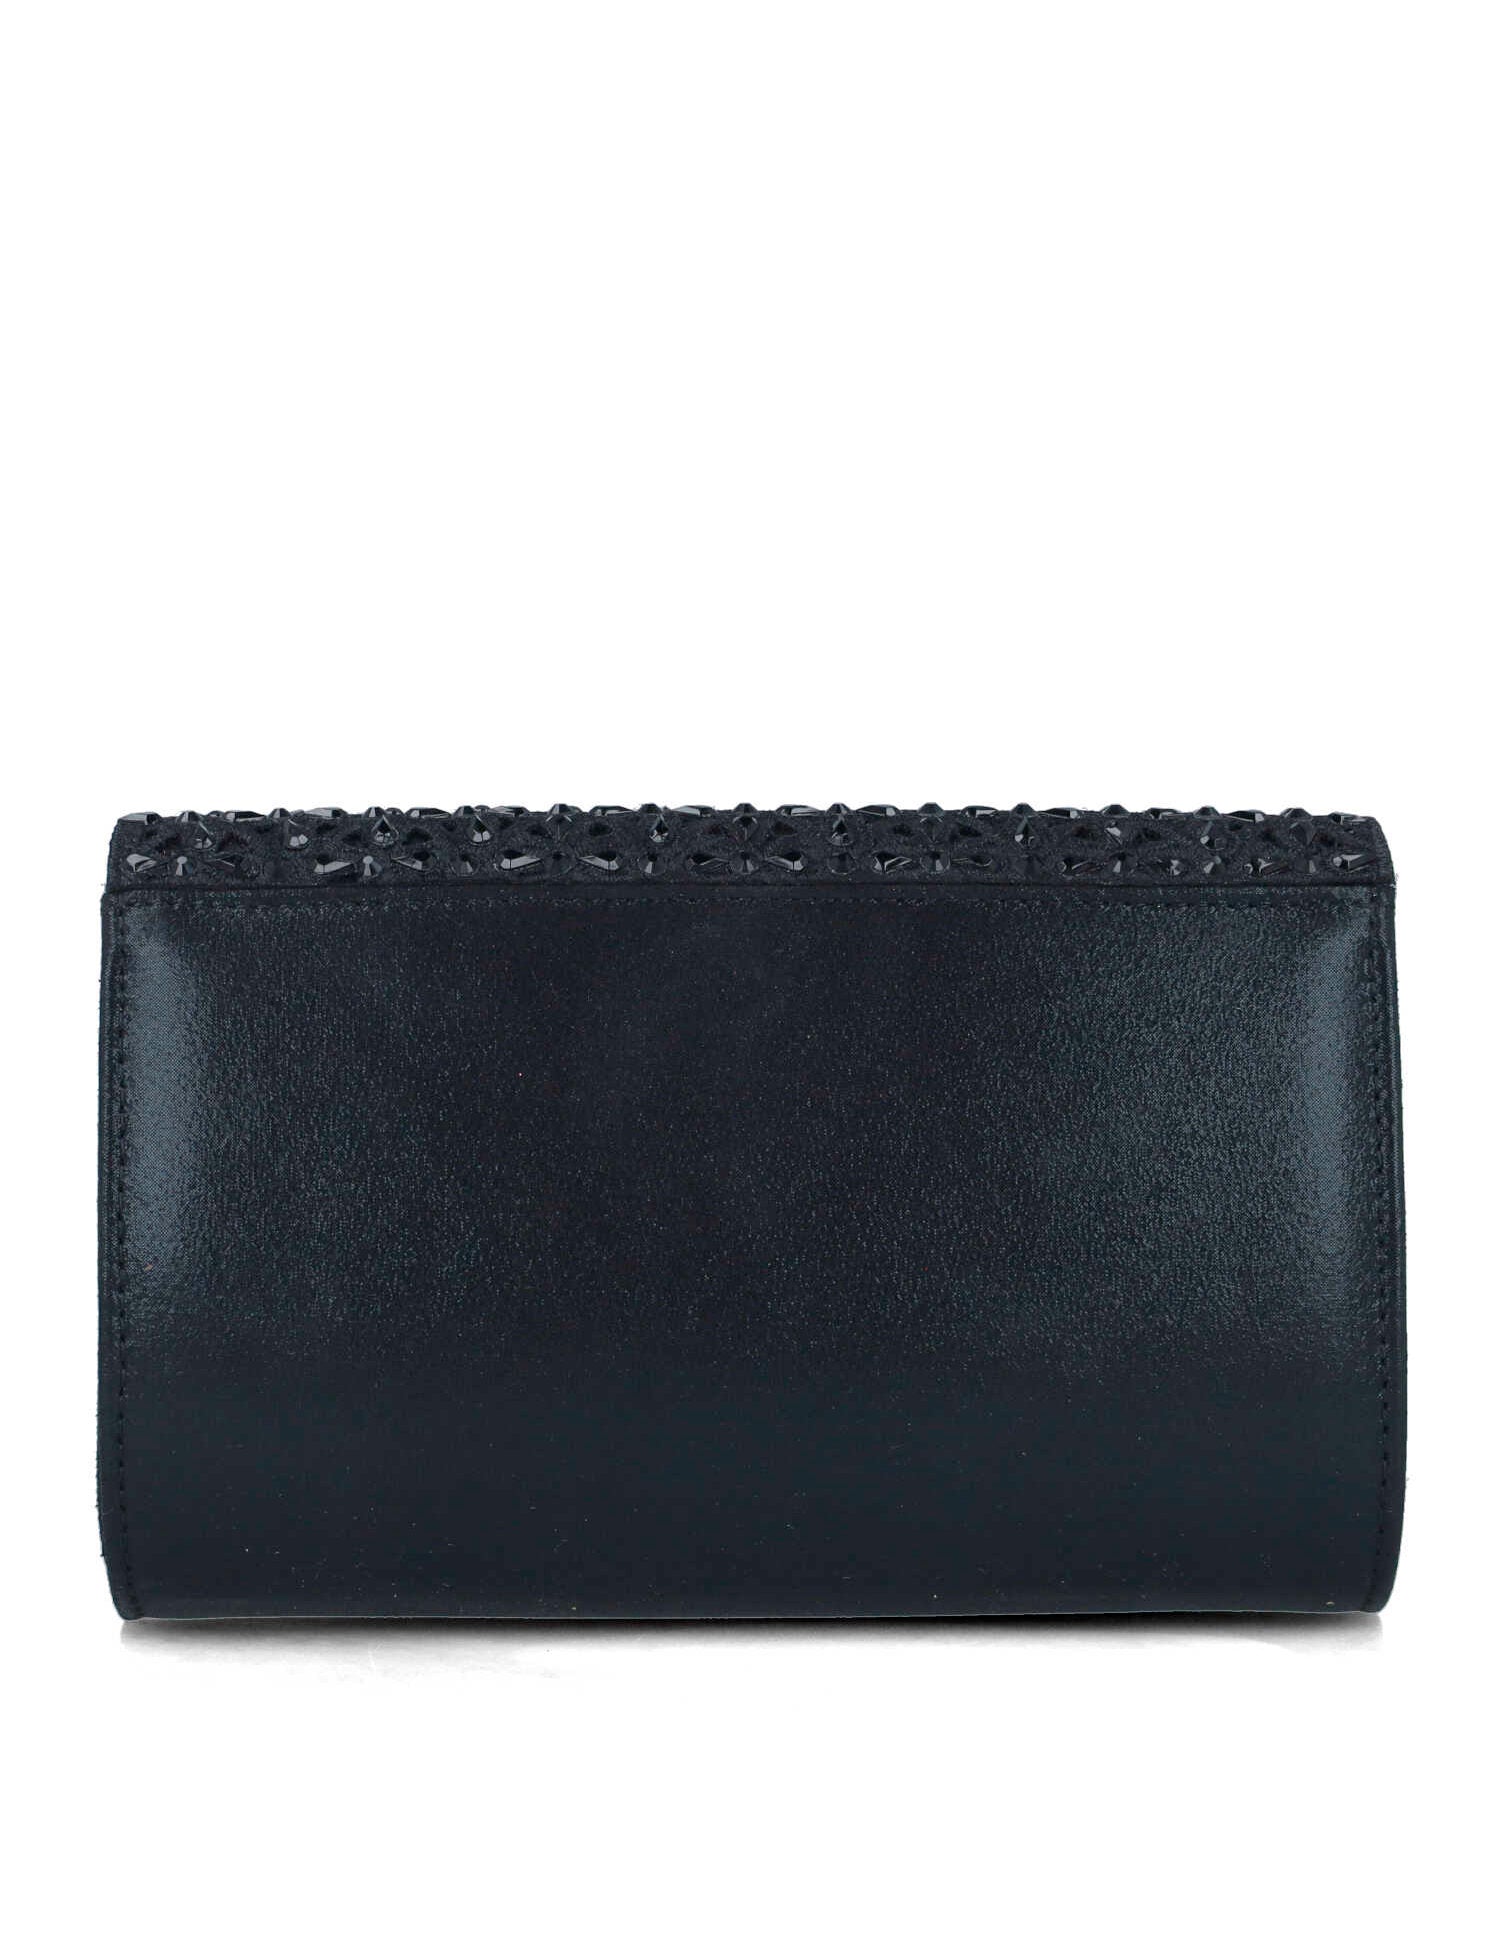 Black Clutch With Embellished Flap_85540_01_03